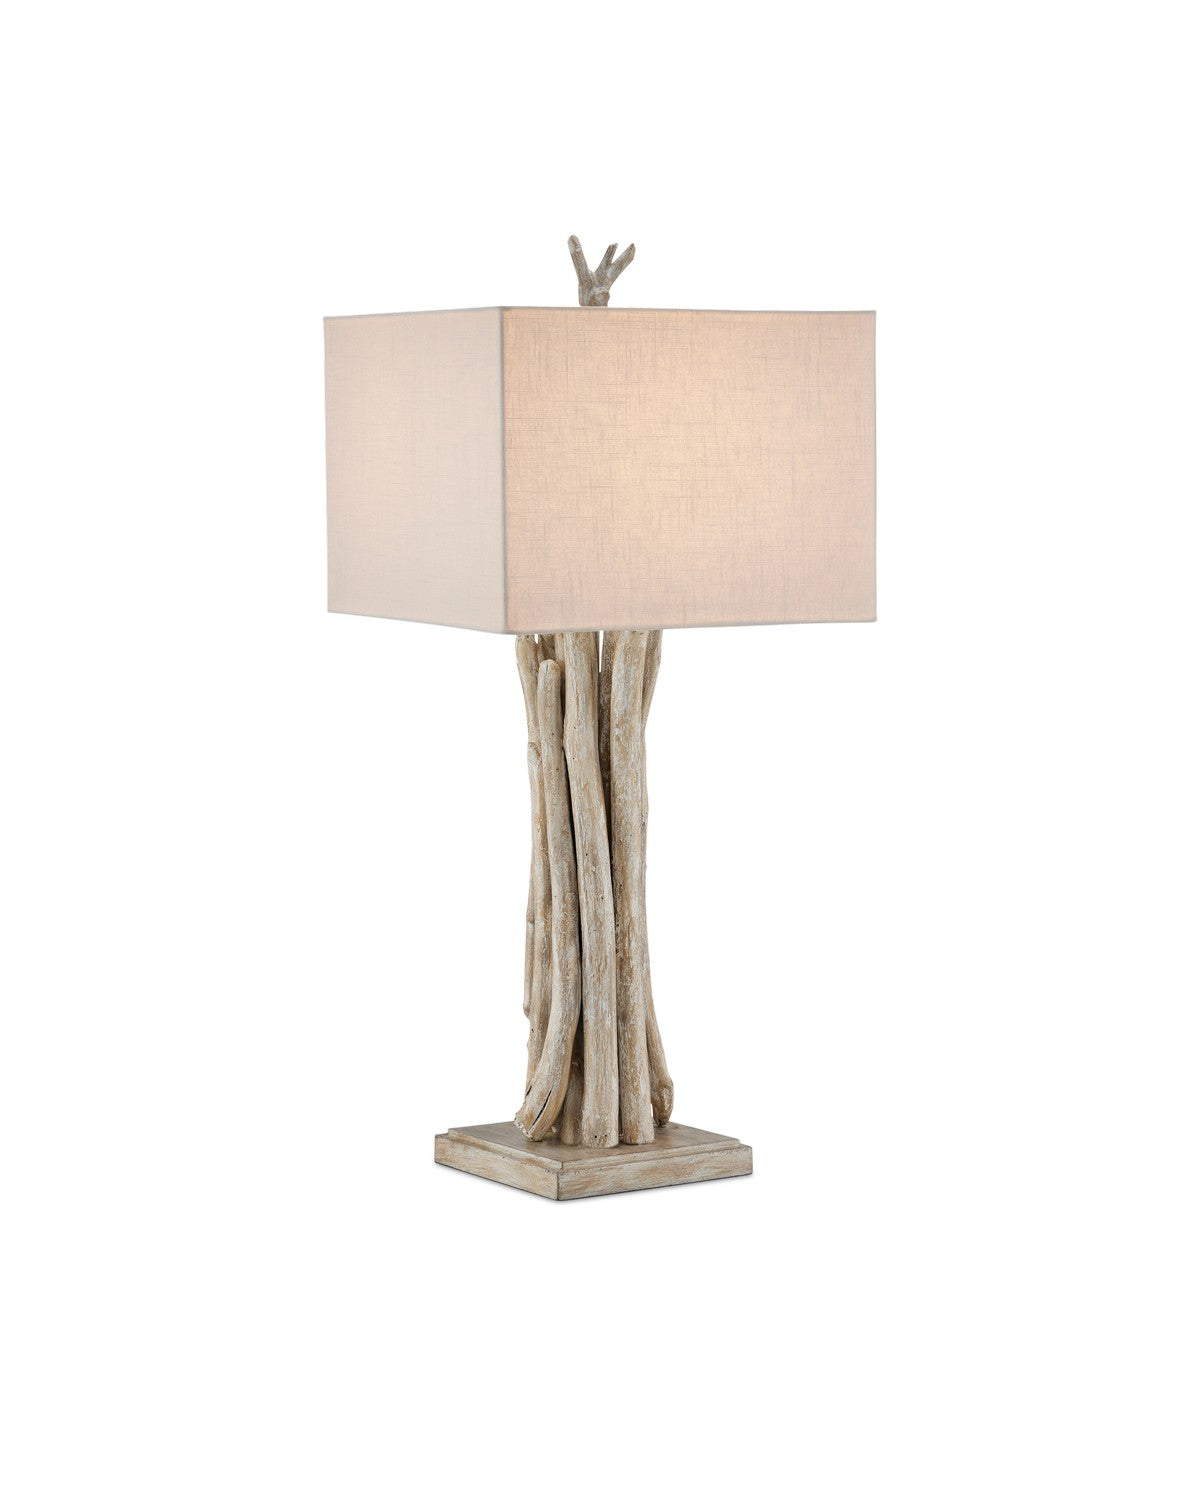 Currey and Company - 6000-0919 - One Light Table Lamp - Driftwood - Whitewashed Driftwood